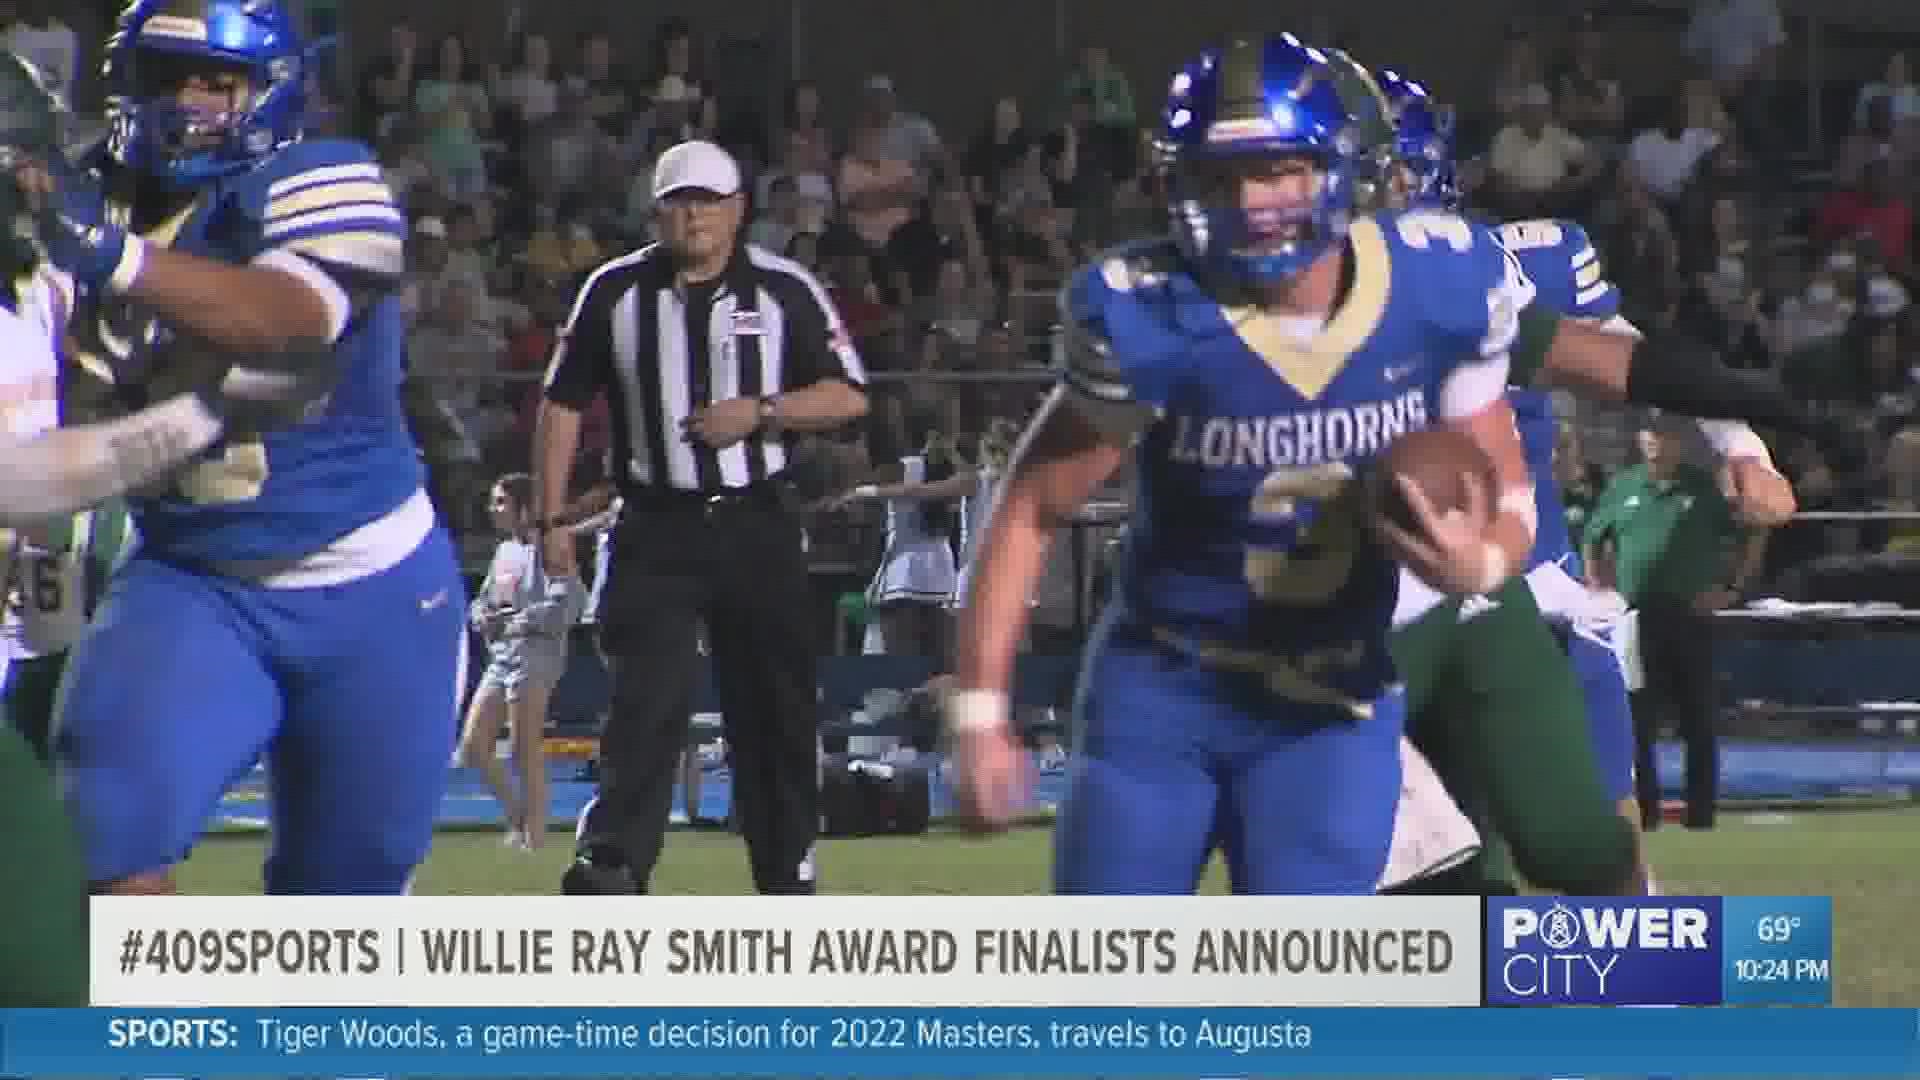 Willie Ray Smith Award winners will be announced on May 2